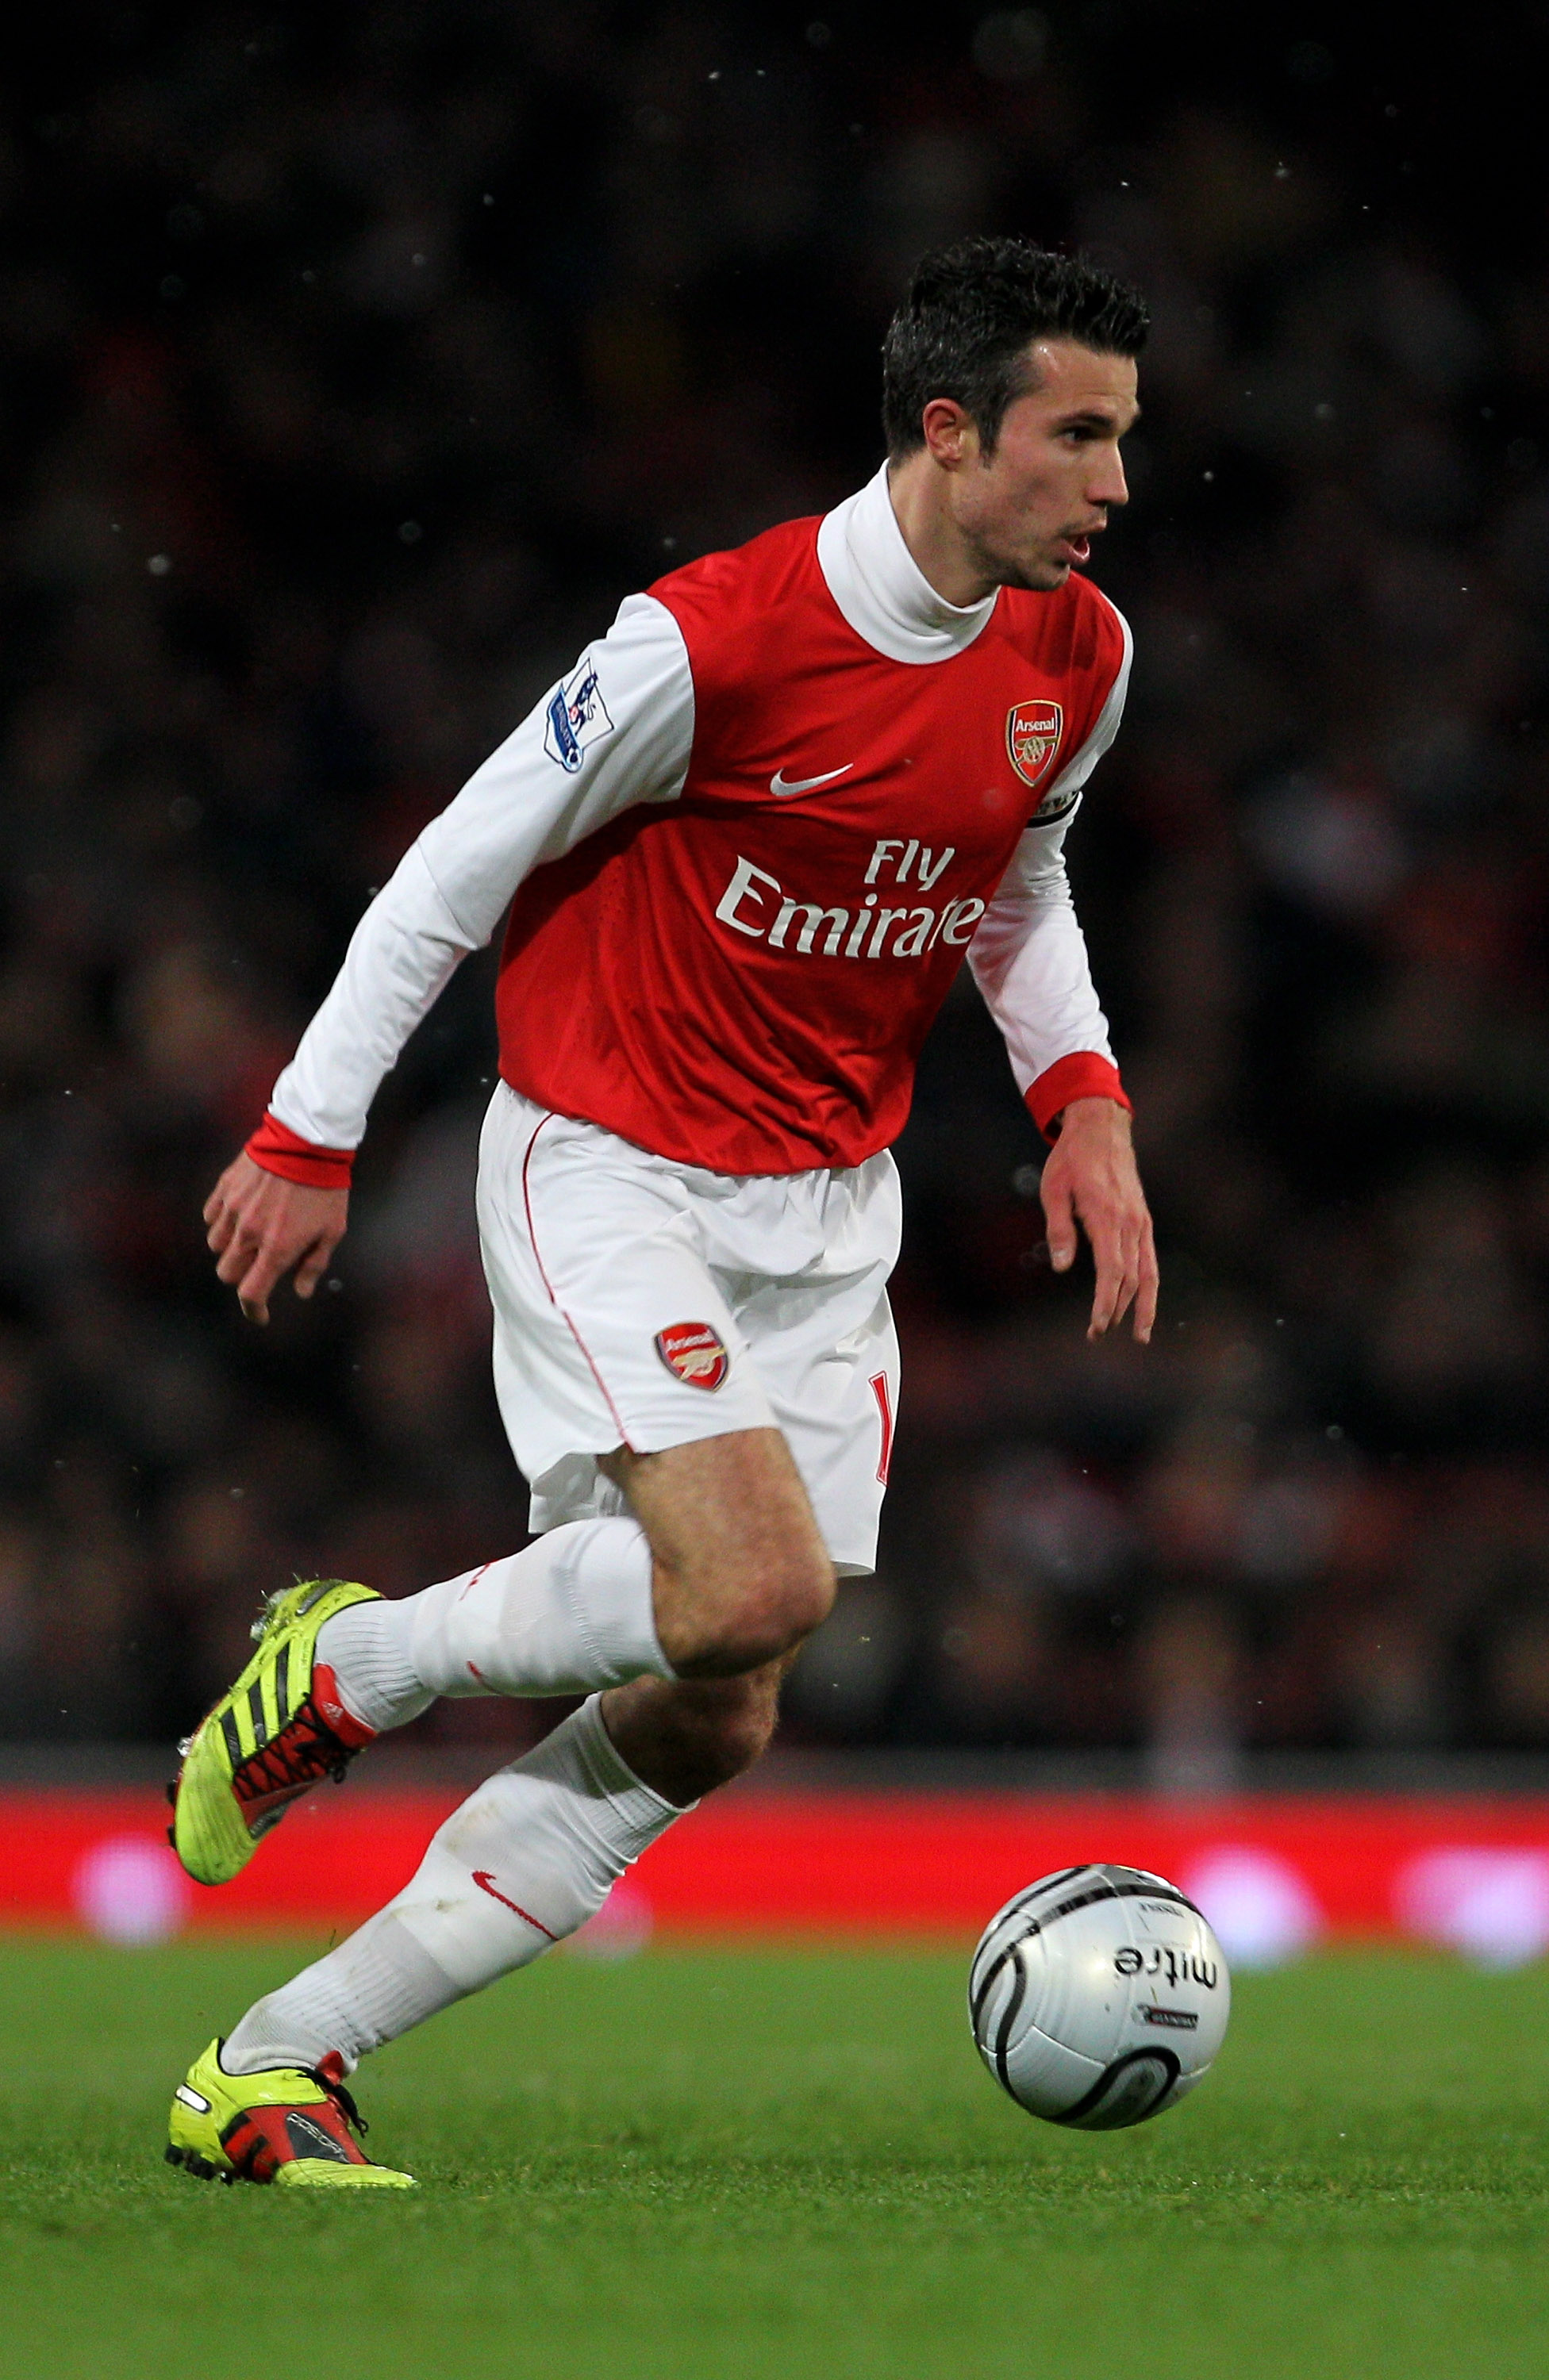 LONDON, ENGLAND - NOVEMBER 30:  Robin van Persie of Arsenal during the Carling Cup quarter final match between Arsenal and Wigan Athletic at the Emirates Stadium on November 30, 2010 in London, England.  (Photo by Clive Rose/Getty Images)